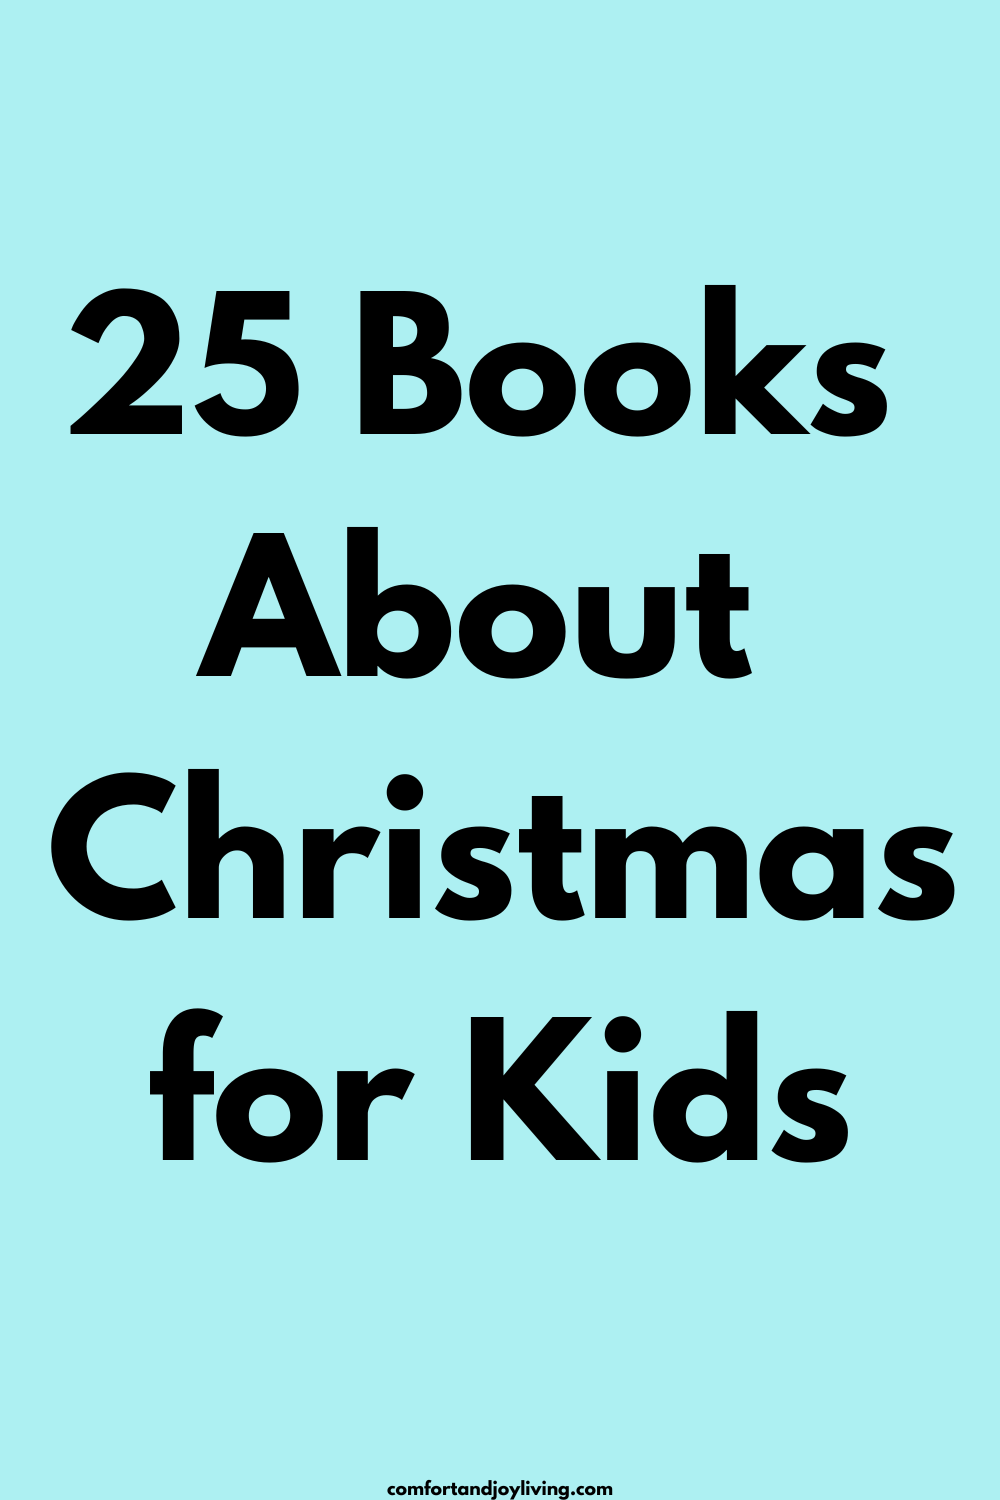 Books About Christmas for Kids